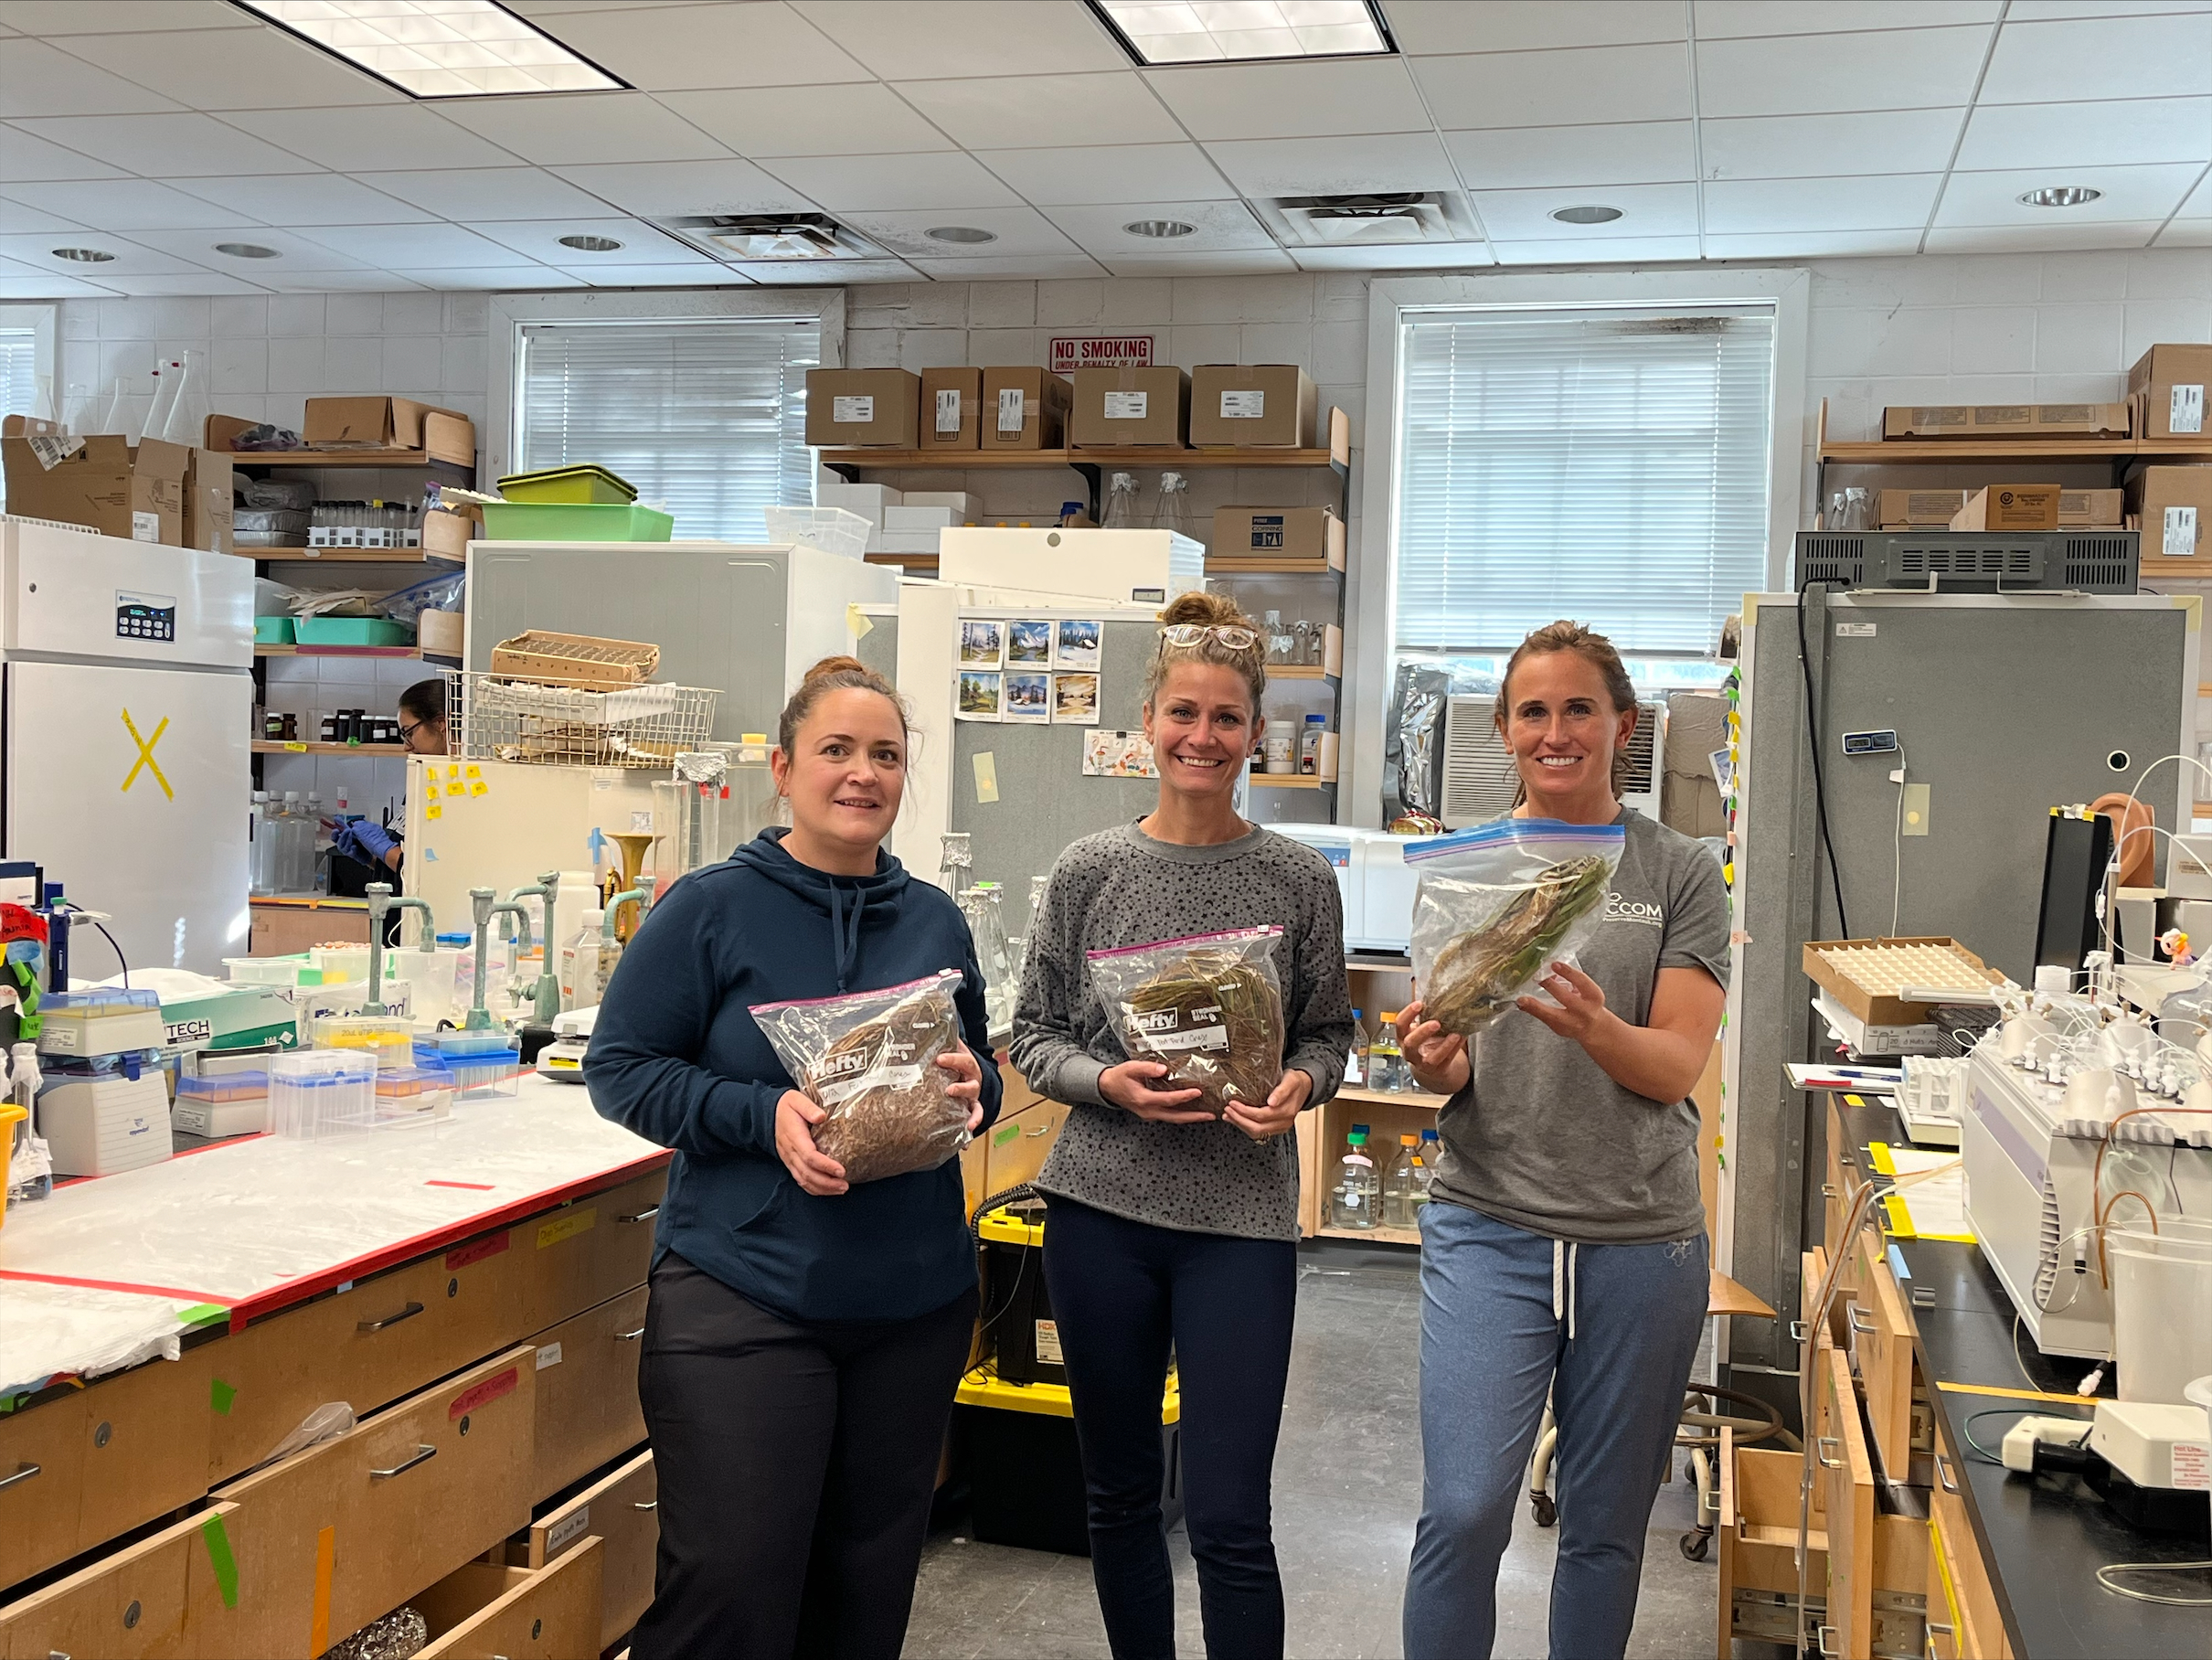 Stony Brook Lab manager Jennifer Goleski, CCOM President Laura Tooman and CCOM Program Specialist Jaime LeDuc with specimens from the Fort Pond Floating Wetland Project in Montauk that were brought to the Gobler Lab at the Stony Brook University Southampton Campus for analysis. COURTESY CONCERNED CITIZENS OF MONTAUK